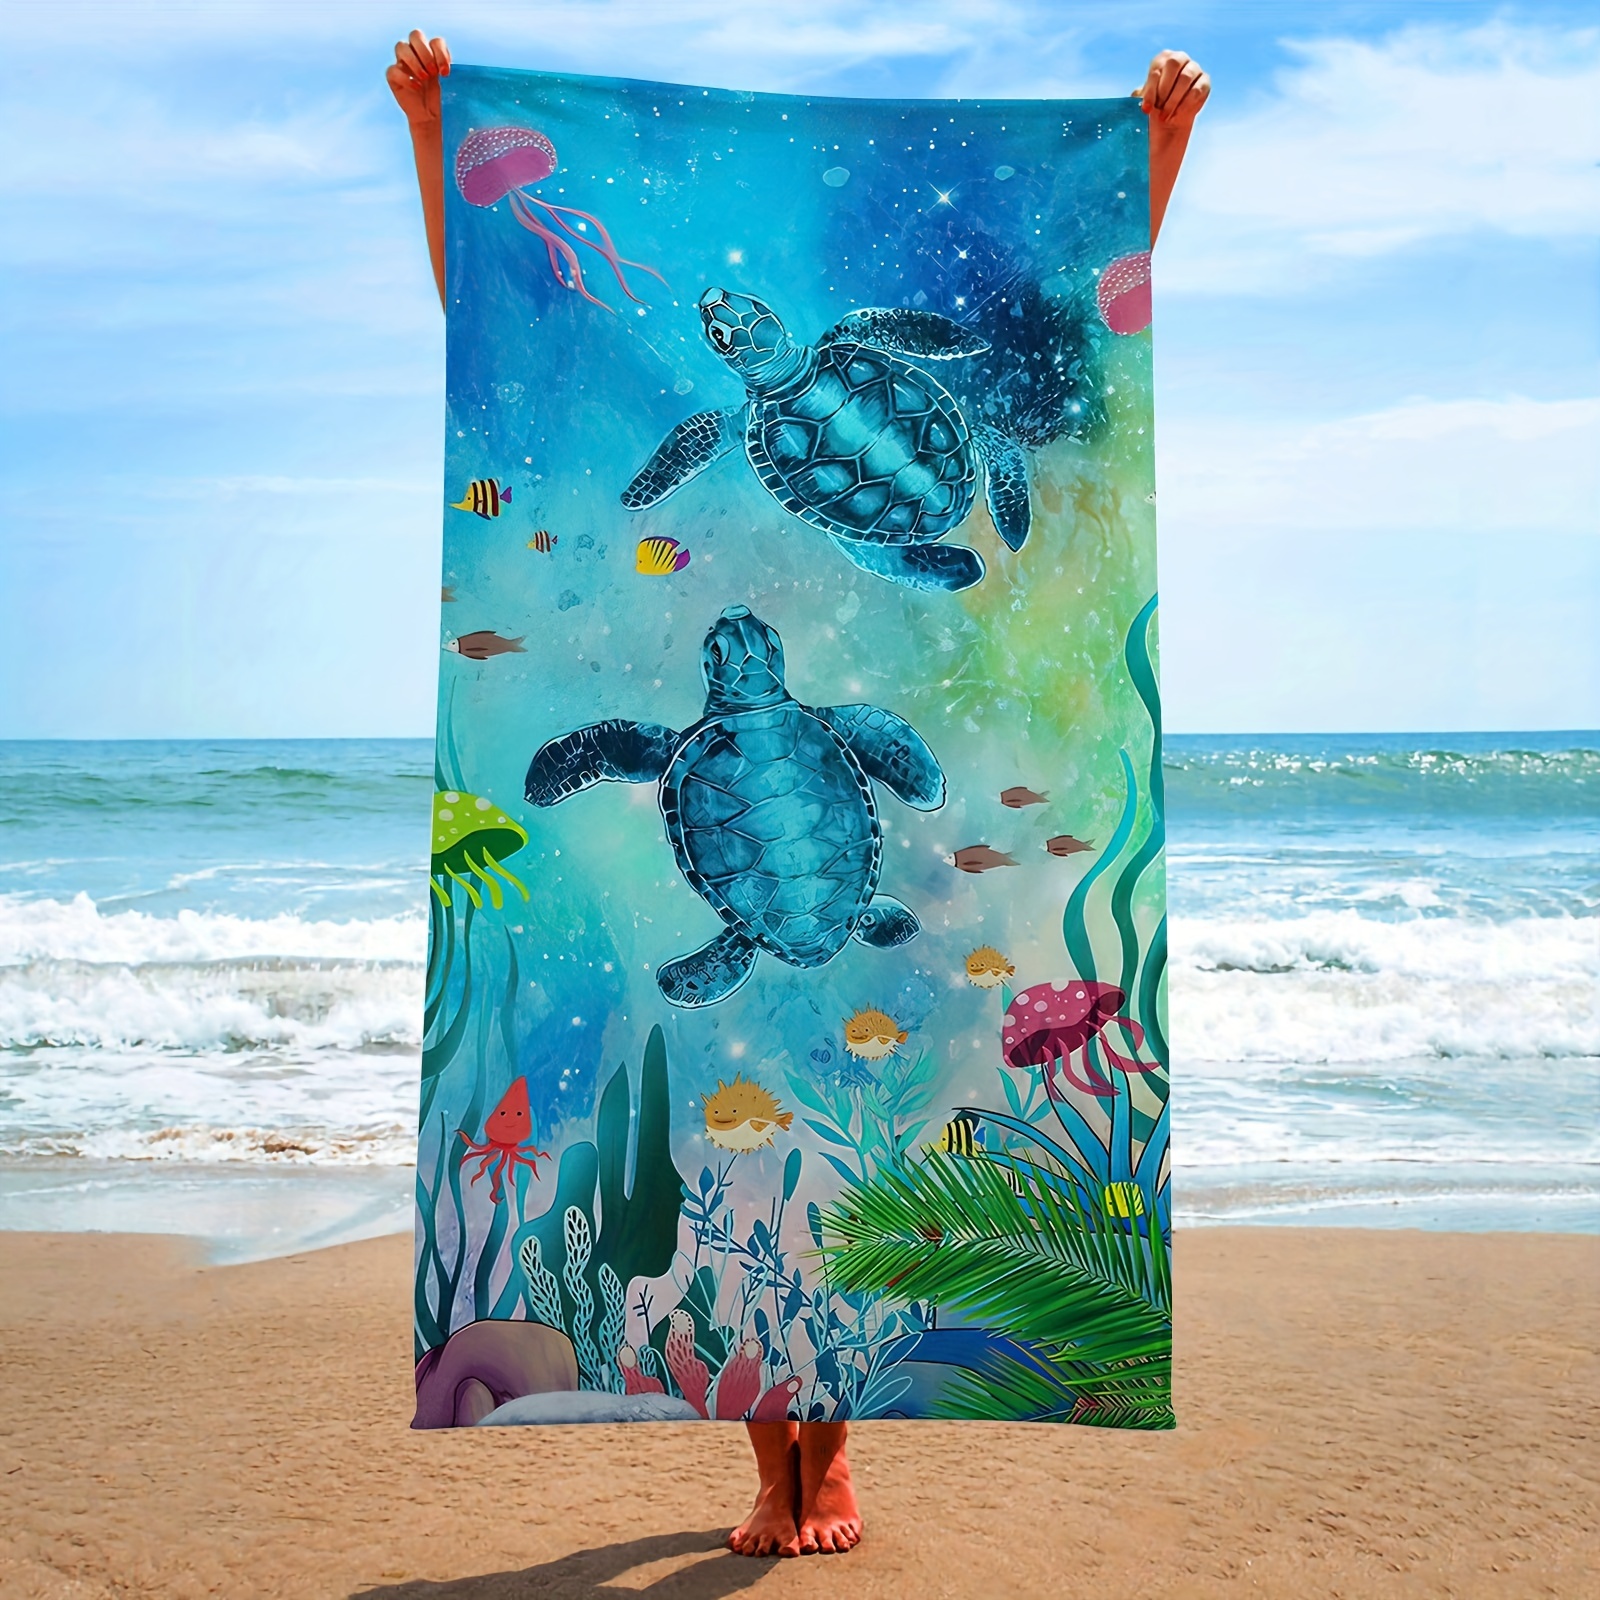 Bass Fishing Wave Superfine Fiber Towel with Carabiner,Quick Drying  Portable,Be Suitable for Beach,Pool,Hiking